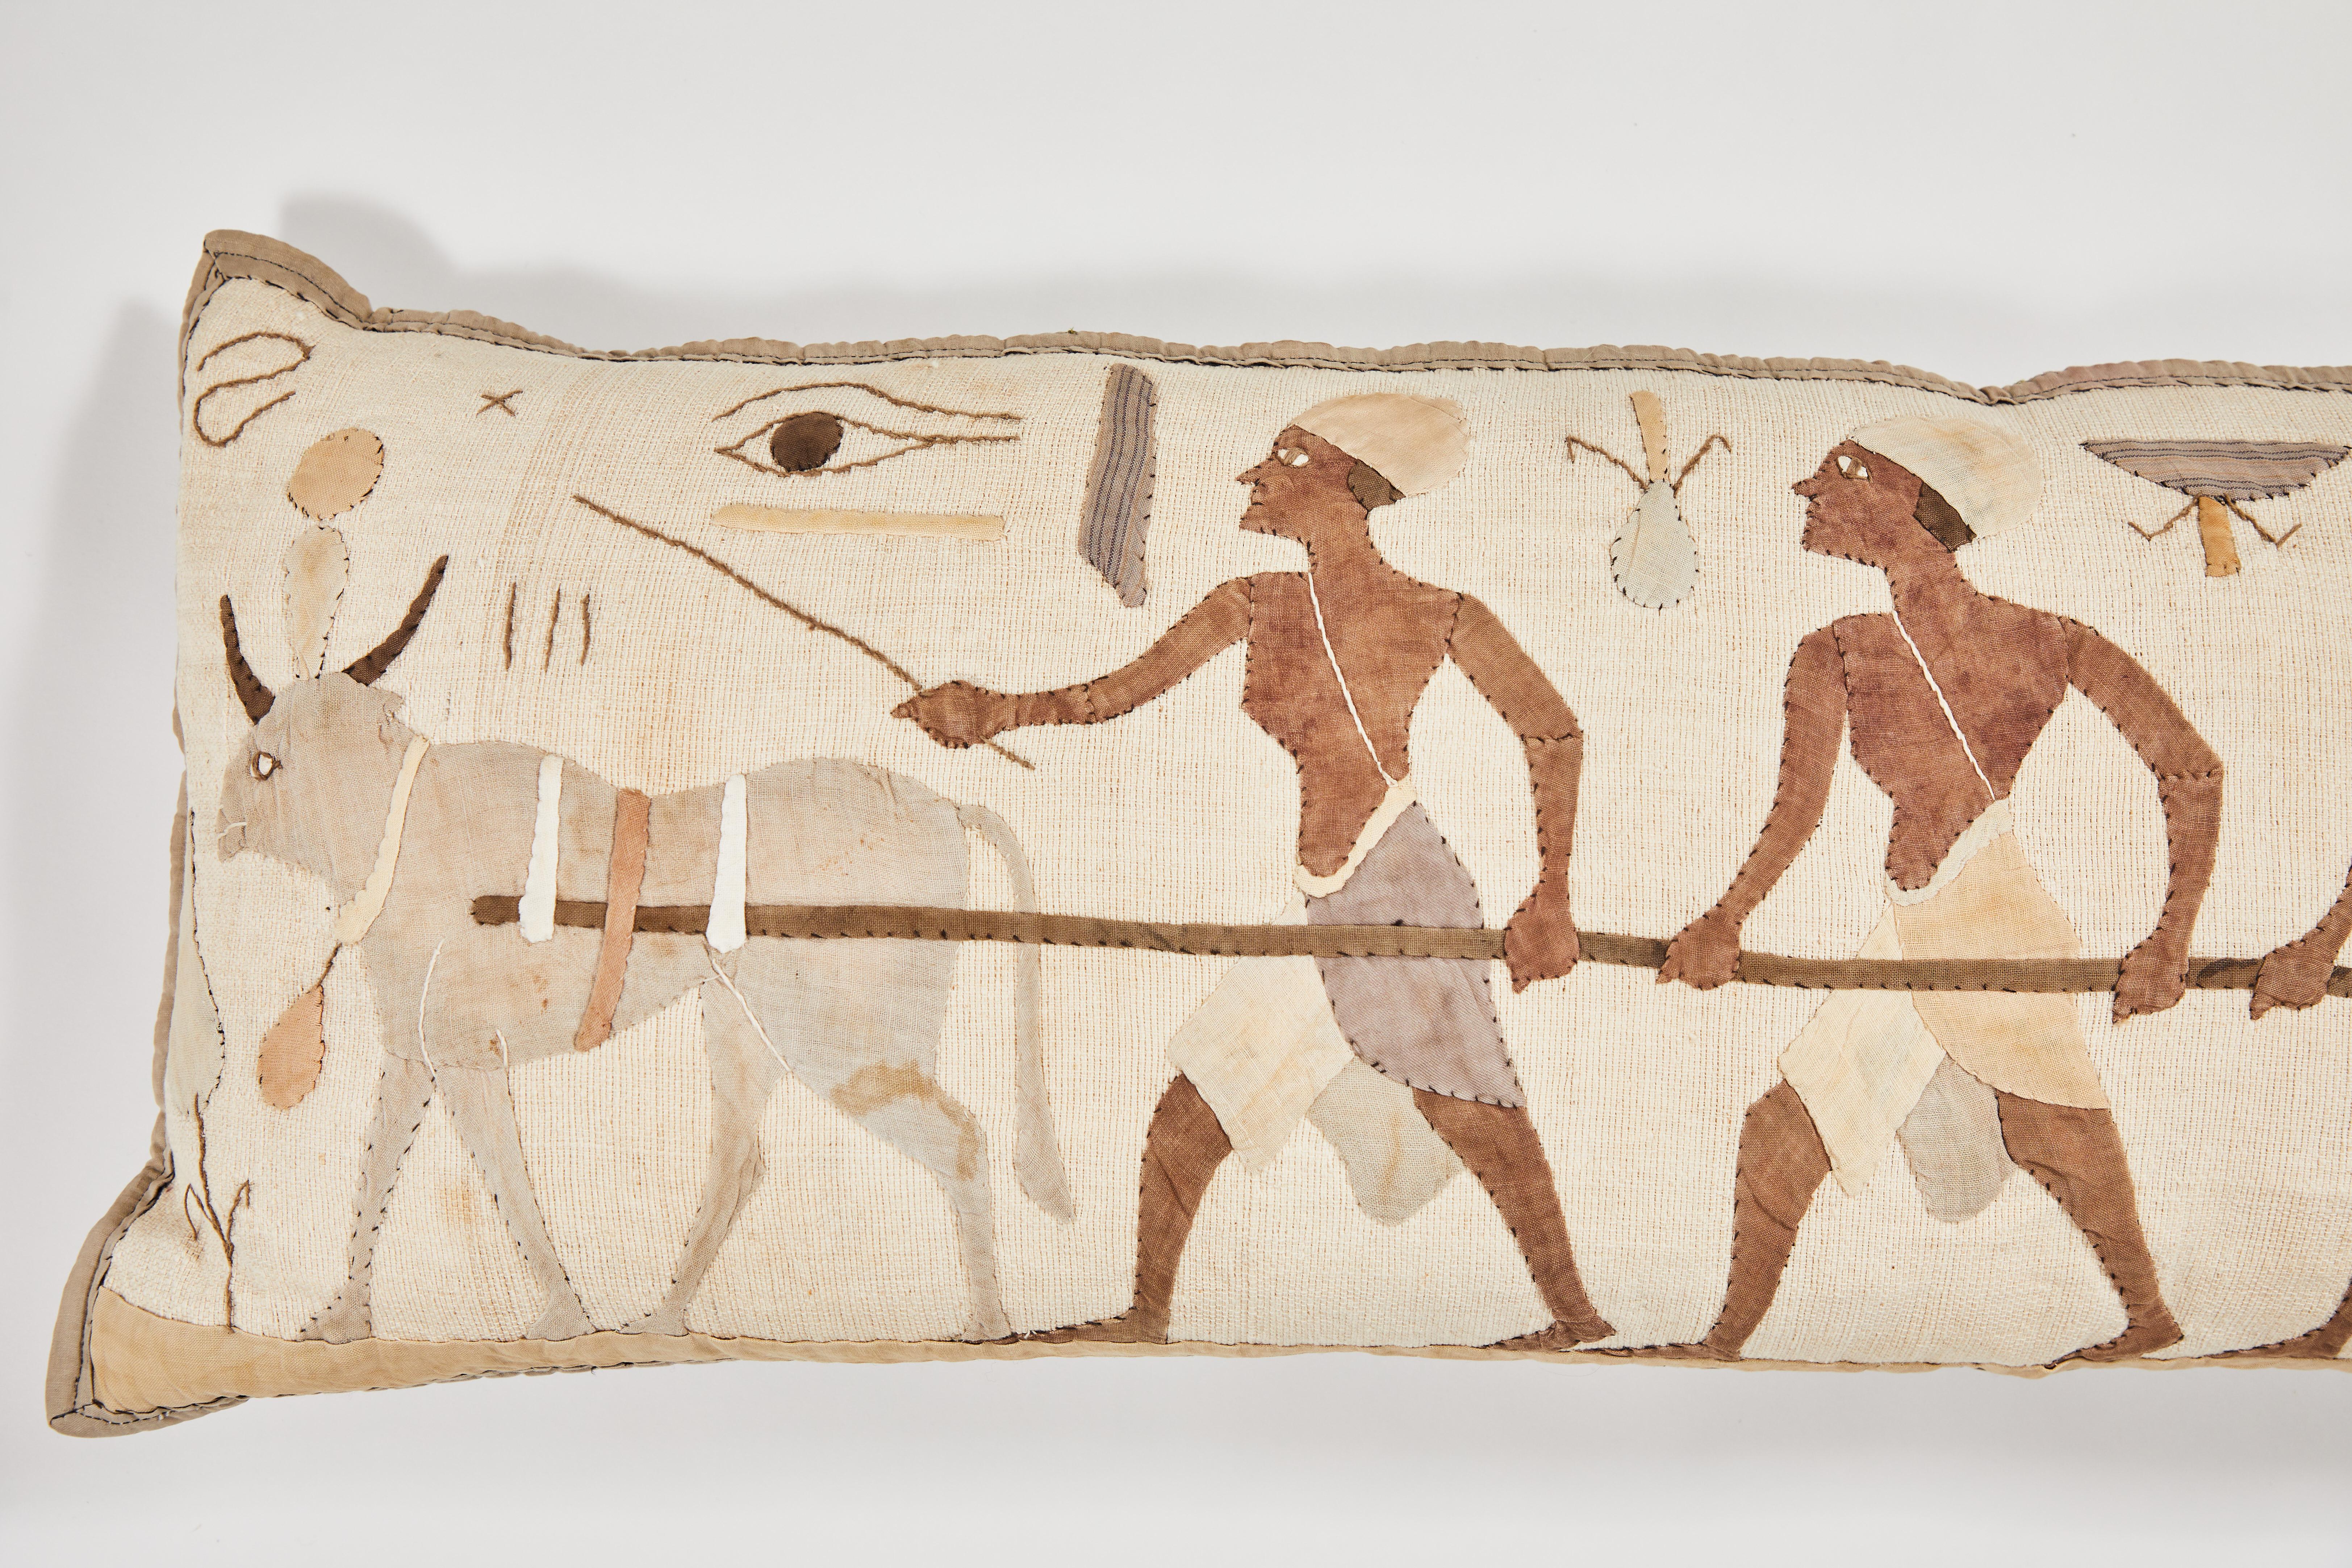 A 1920s textile with a hand-embroidered Egyptian scene in neutrals has been re-purposed and custom made into a long decorative bolster pillow for a sofa or bed. With running stitch symbols and appliquéd ox, toiling workers, falcon, eye of Horus,